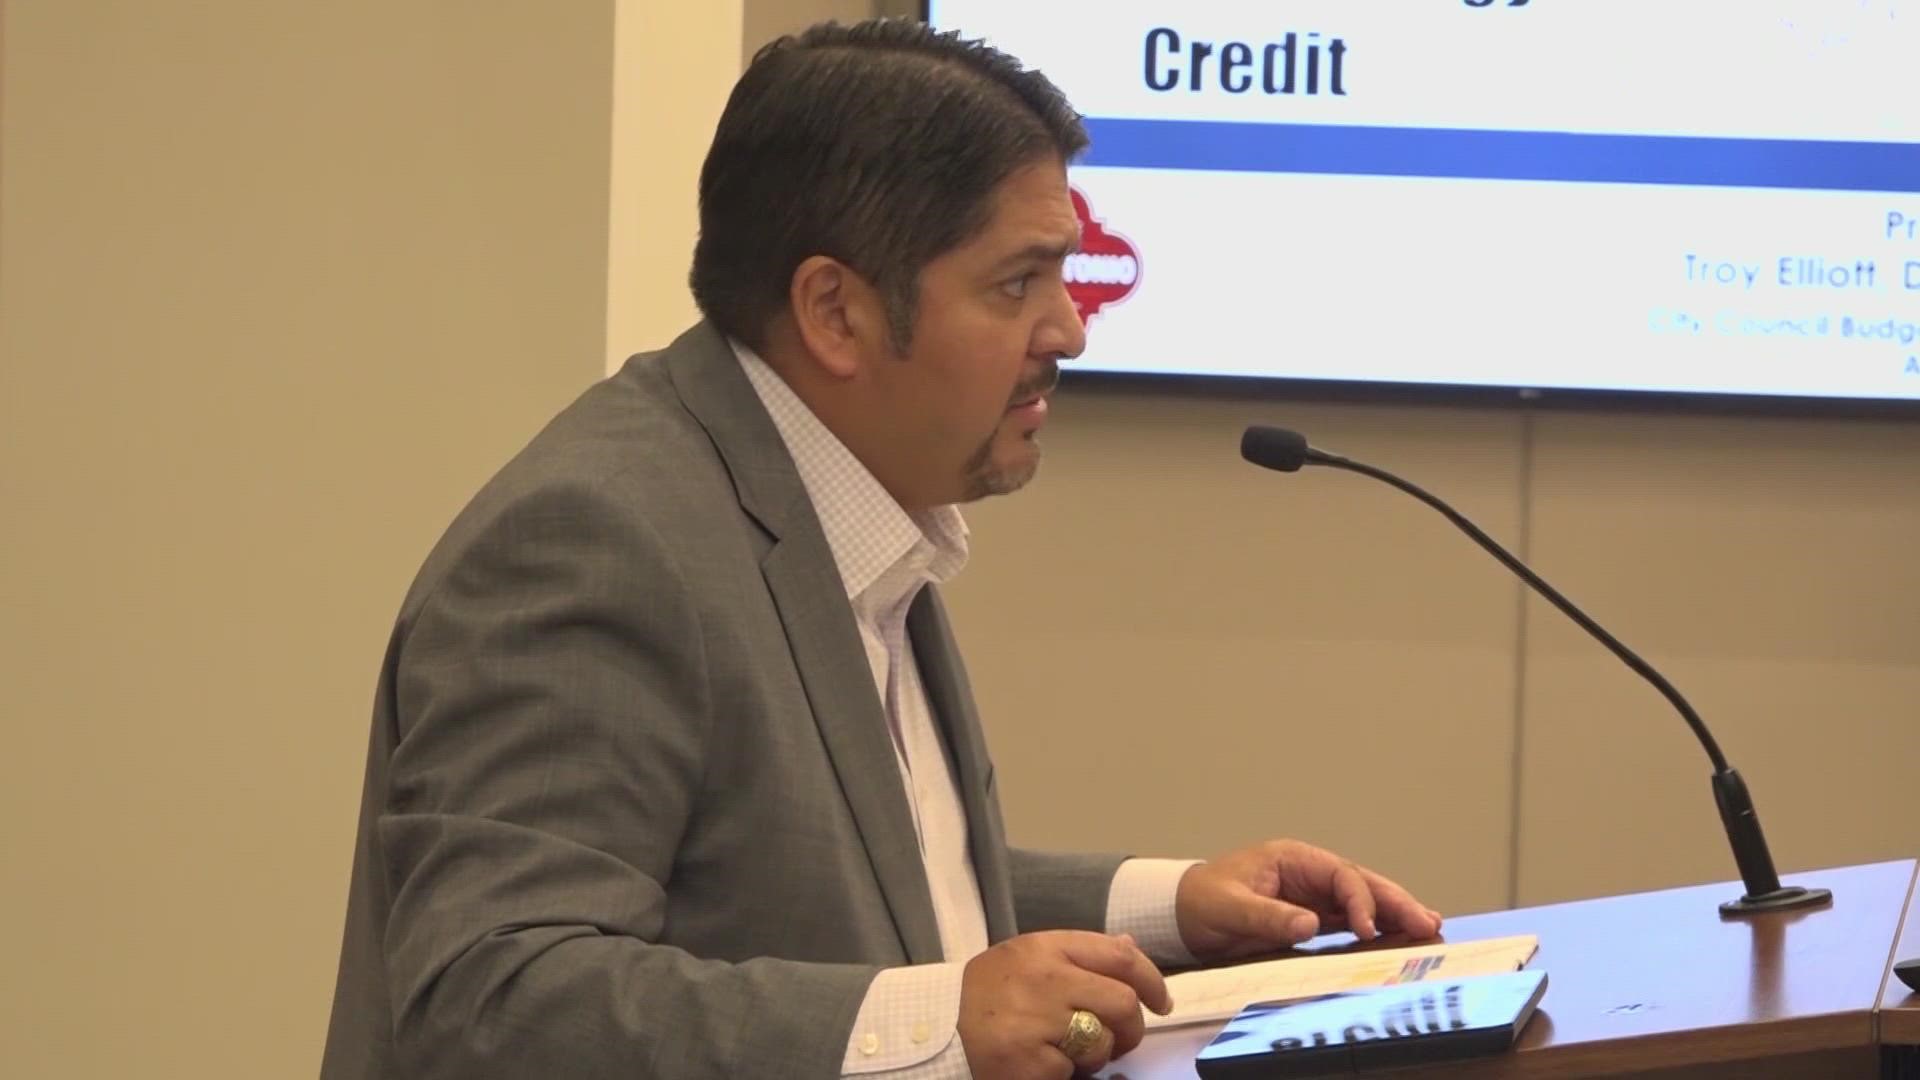 A budget work session will be held Tuesday to discuss the proposed customer credit, which some council members believe should be used elsewhere.